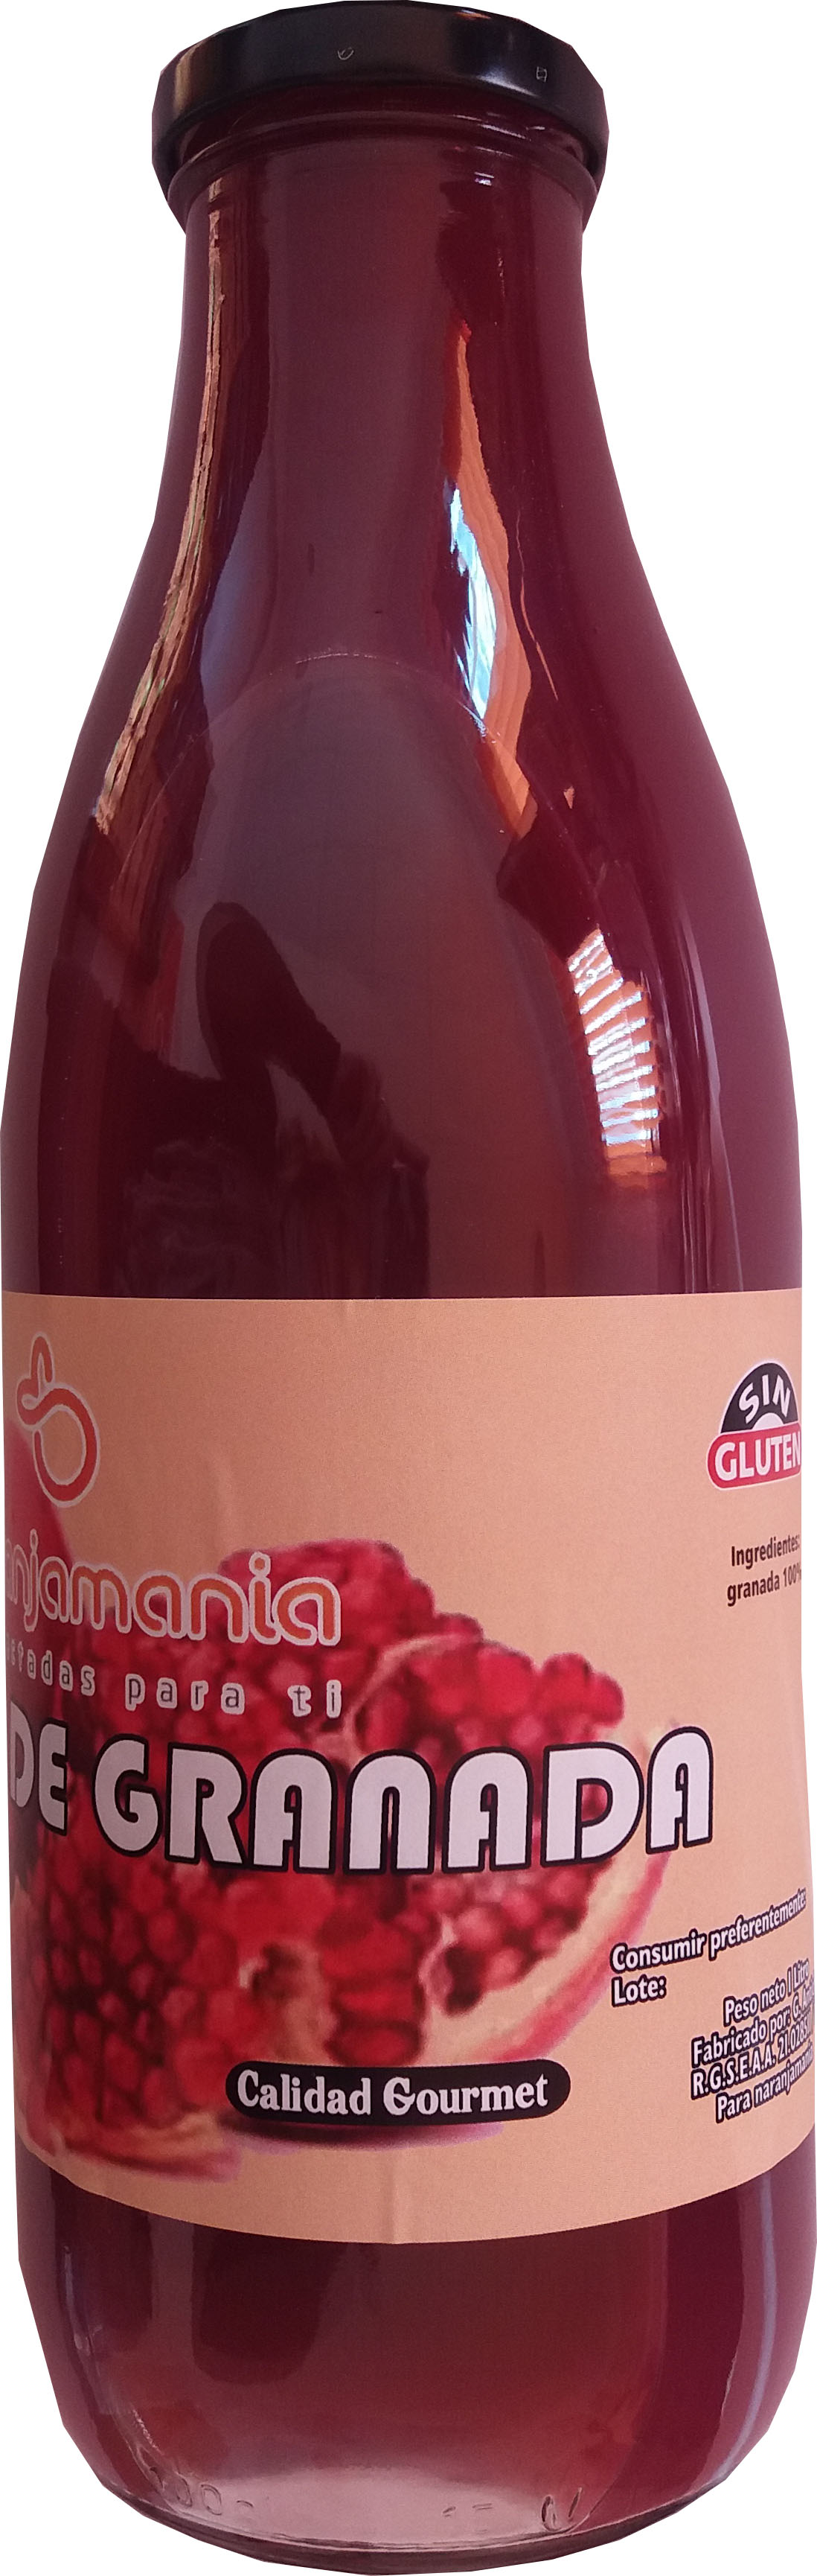 Natural juice of pomegranate box of 4 liters.